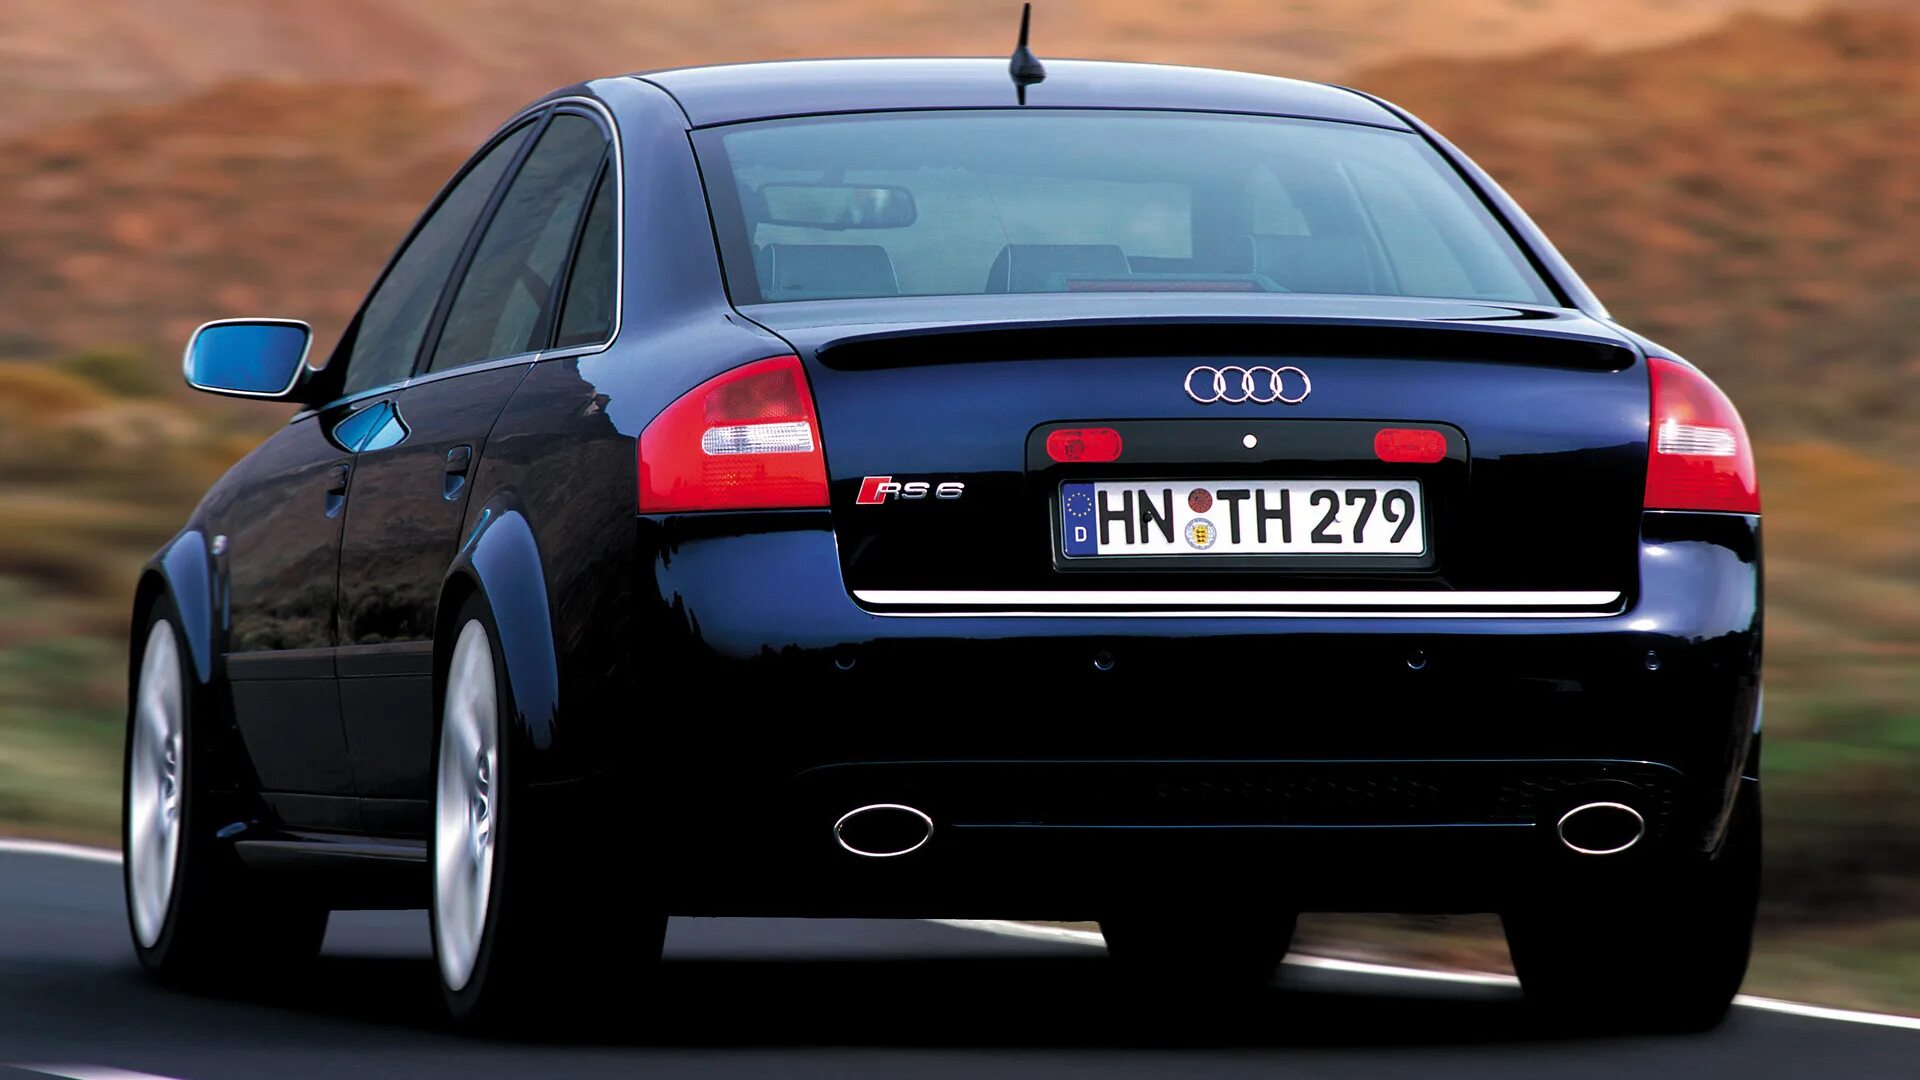 Рс c. Audi rs6 c5. Audi rs6 c5 sedan. Audi a6 rs6 c5. Ауди rs6 2002.